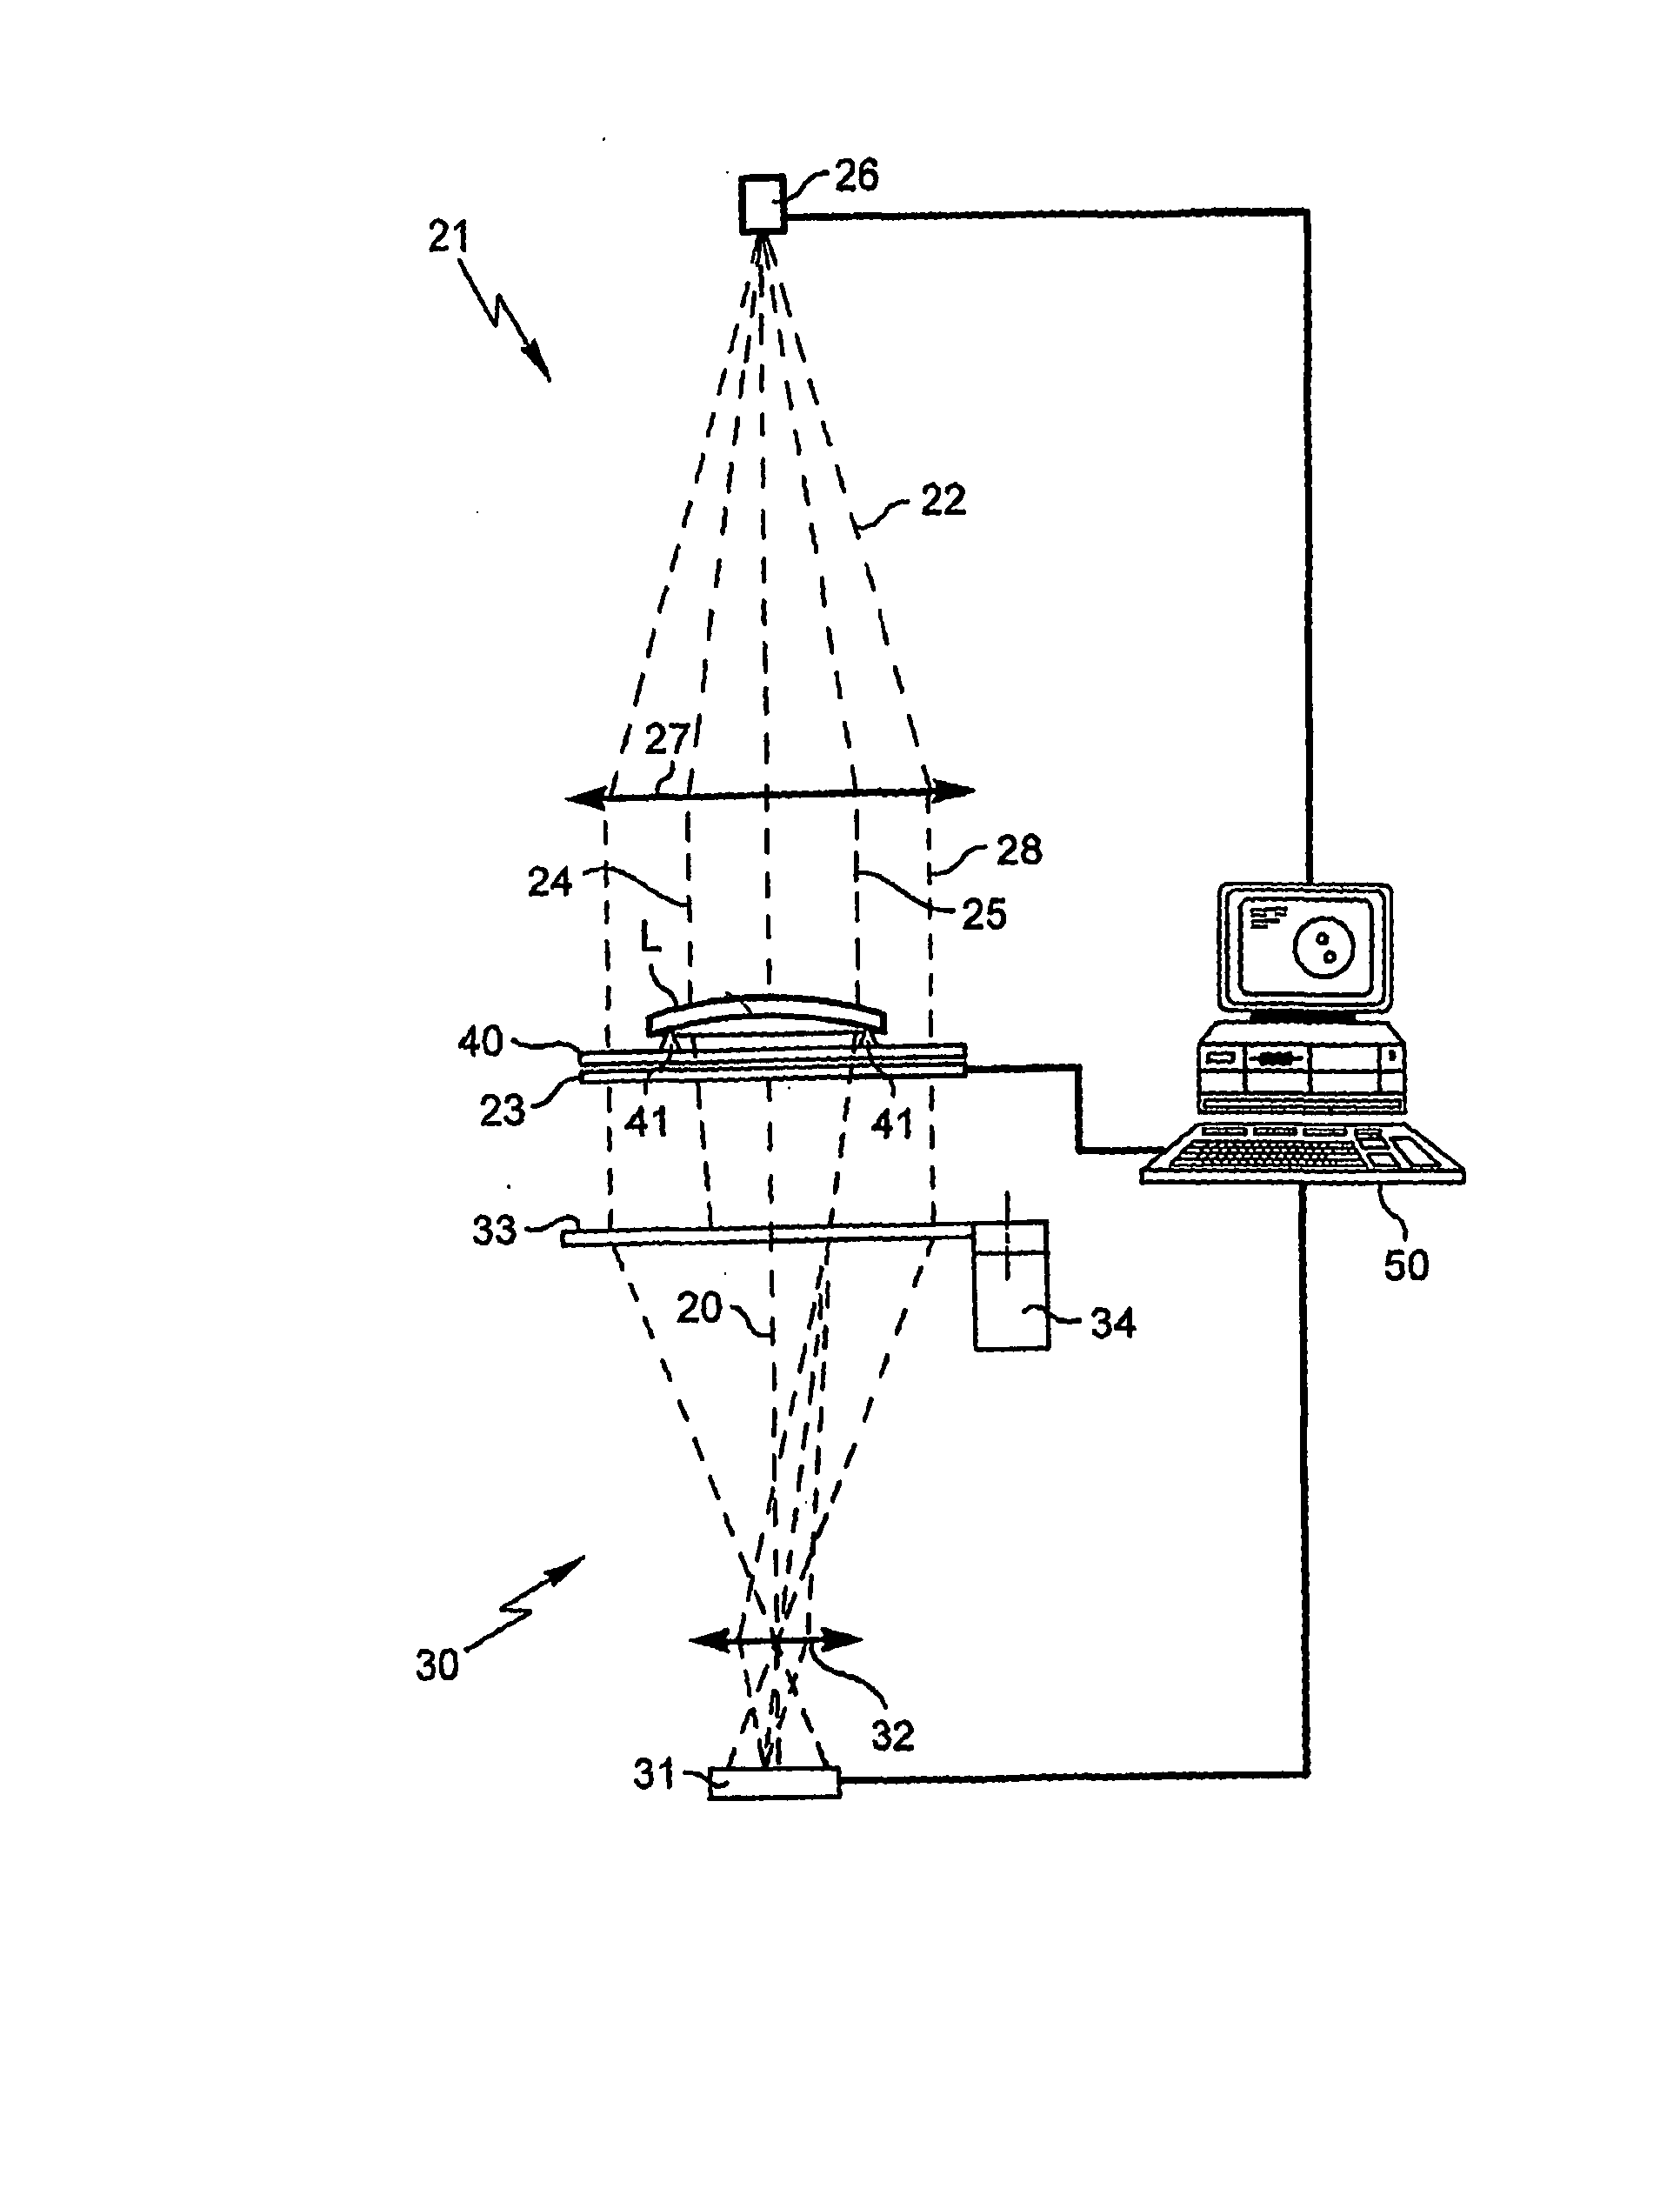 Method And Apparatus For Locally Measuring Refractive Characteristics Of A Lens In One Or Several Specific Points Of Said Lens